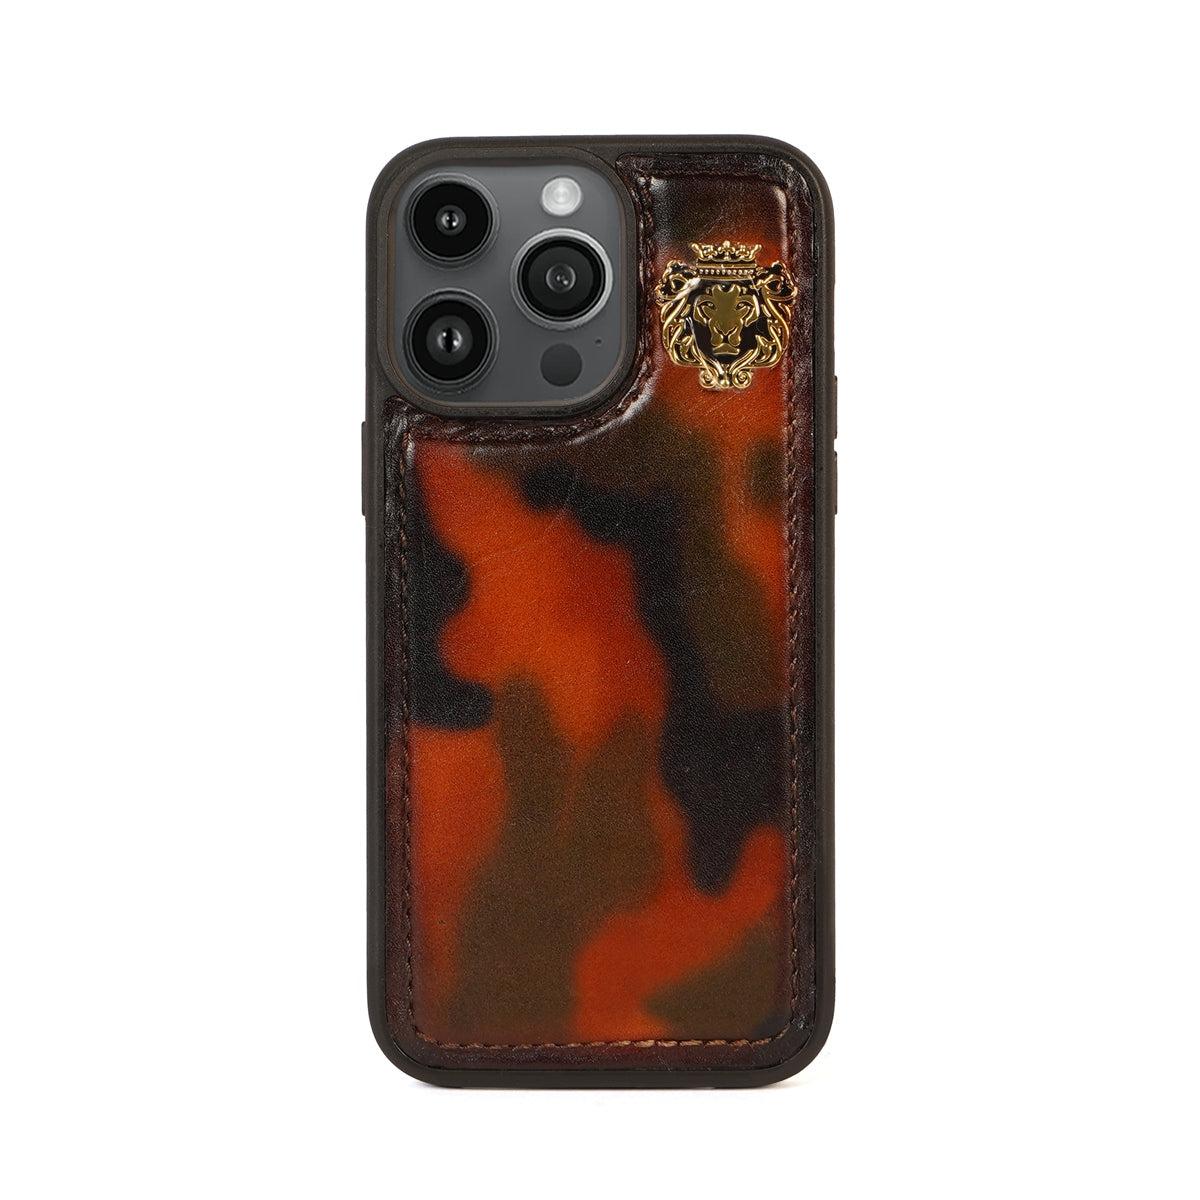 Hand Painted Mobile Cover in Camo Tan Apple iPhone Series Leather by Brune & Bareskin